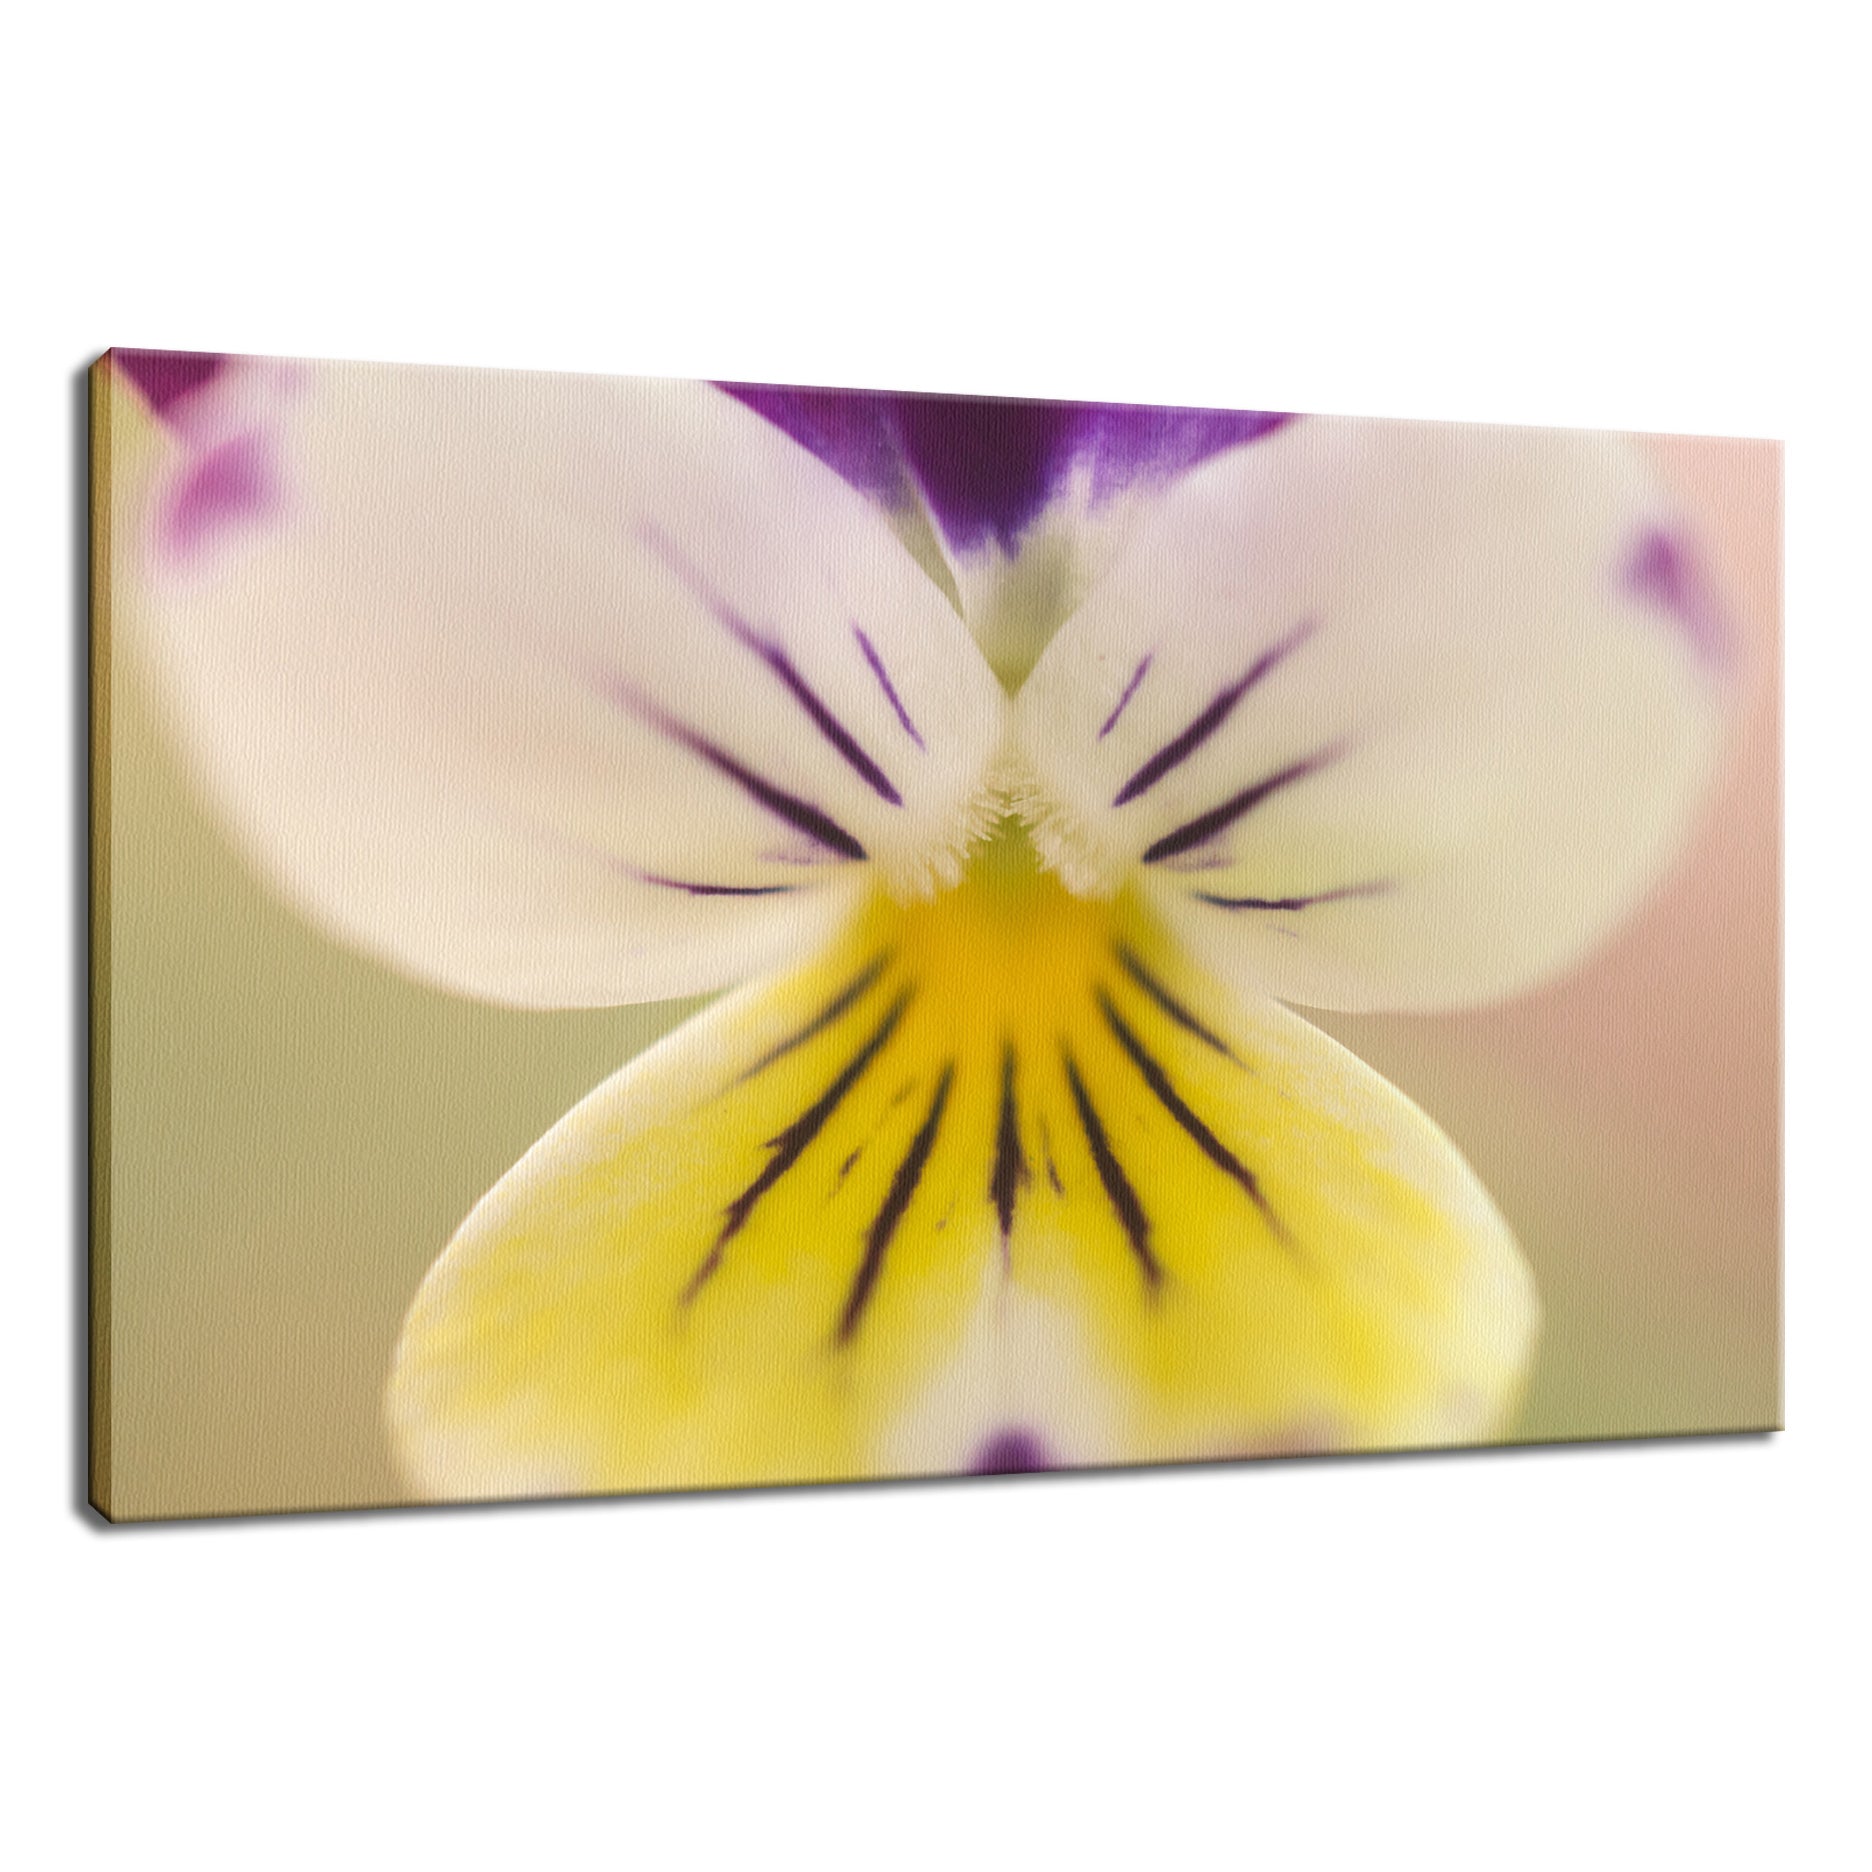 Oh, Violet Nature / Floral Photo Fine Art Canvas Wall Art Prints  - PIPAFINEART